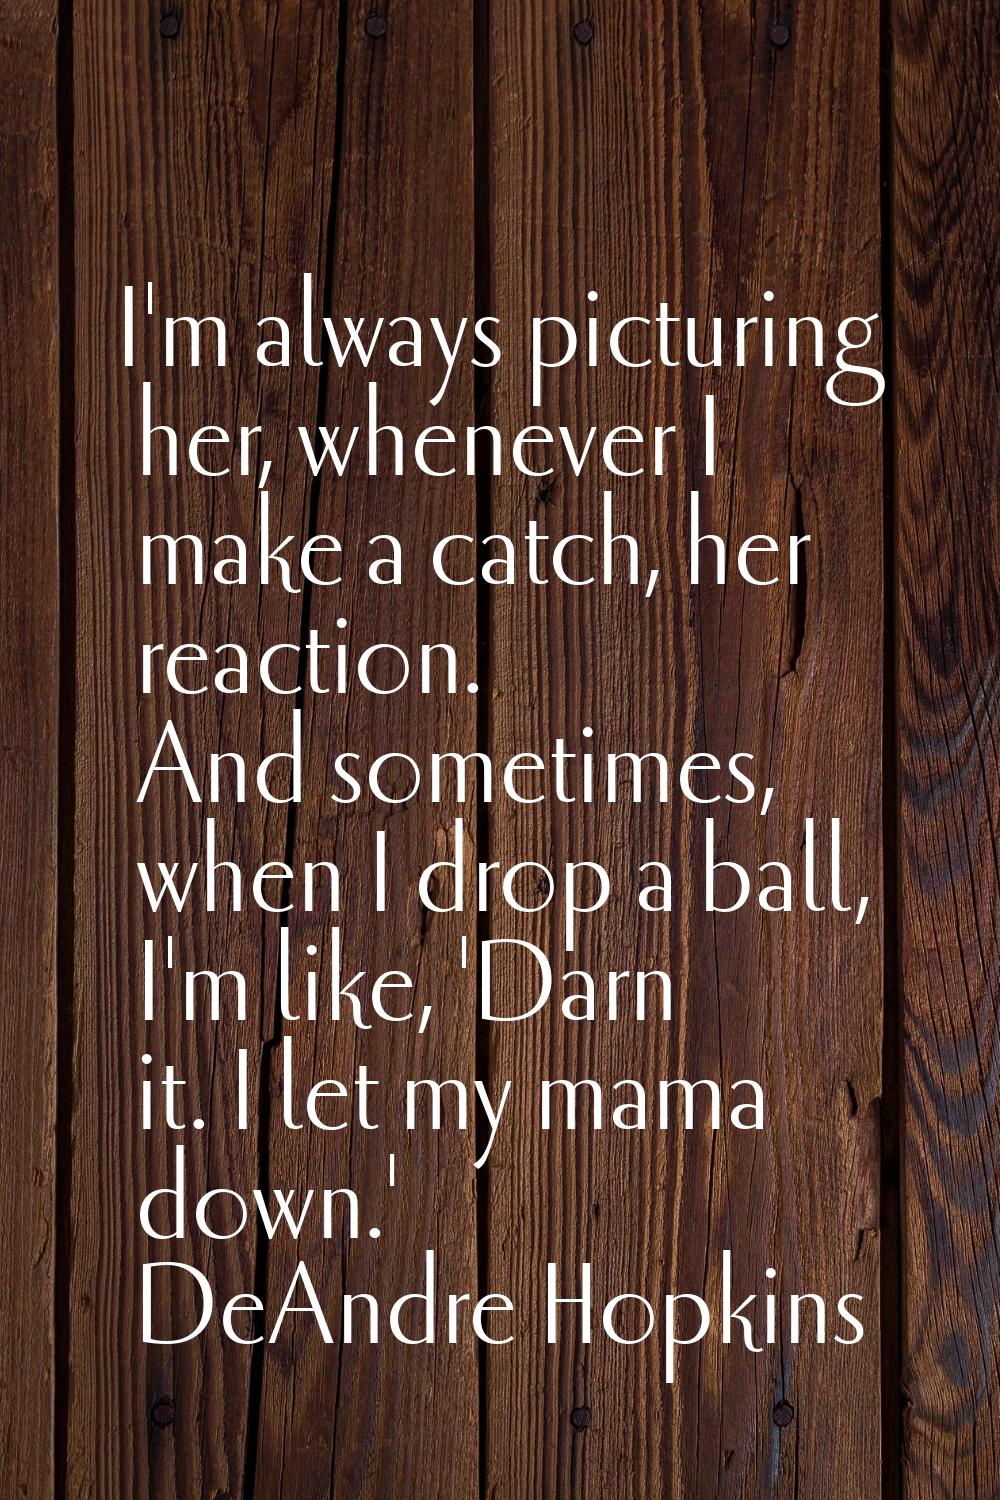 I'm always picturing her, whenever I make a catch, her reaction. And sometimes, when I drop a ball,